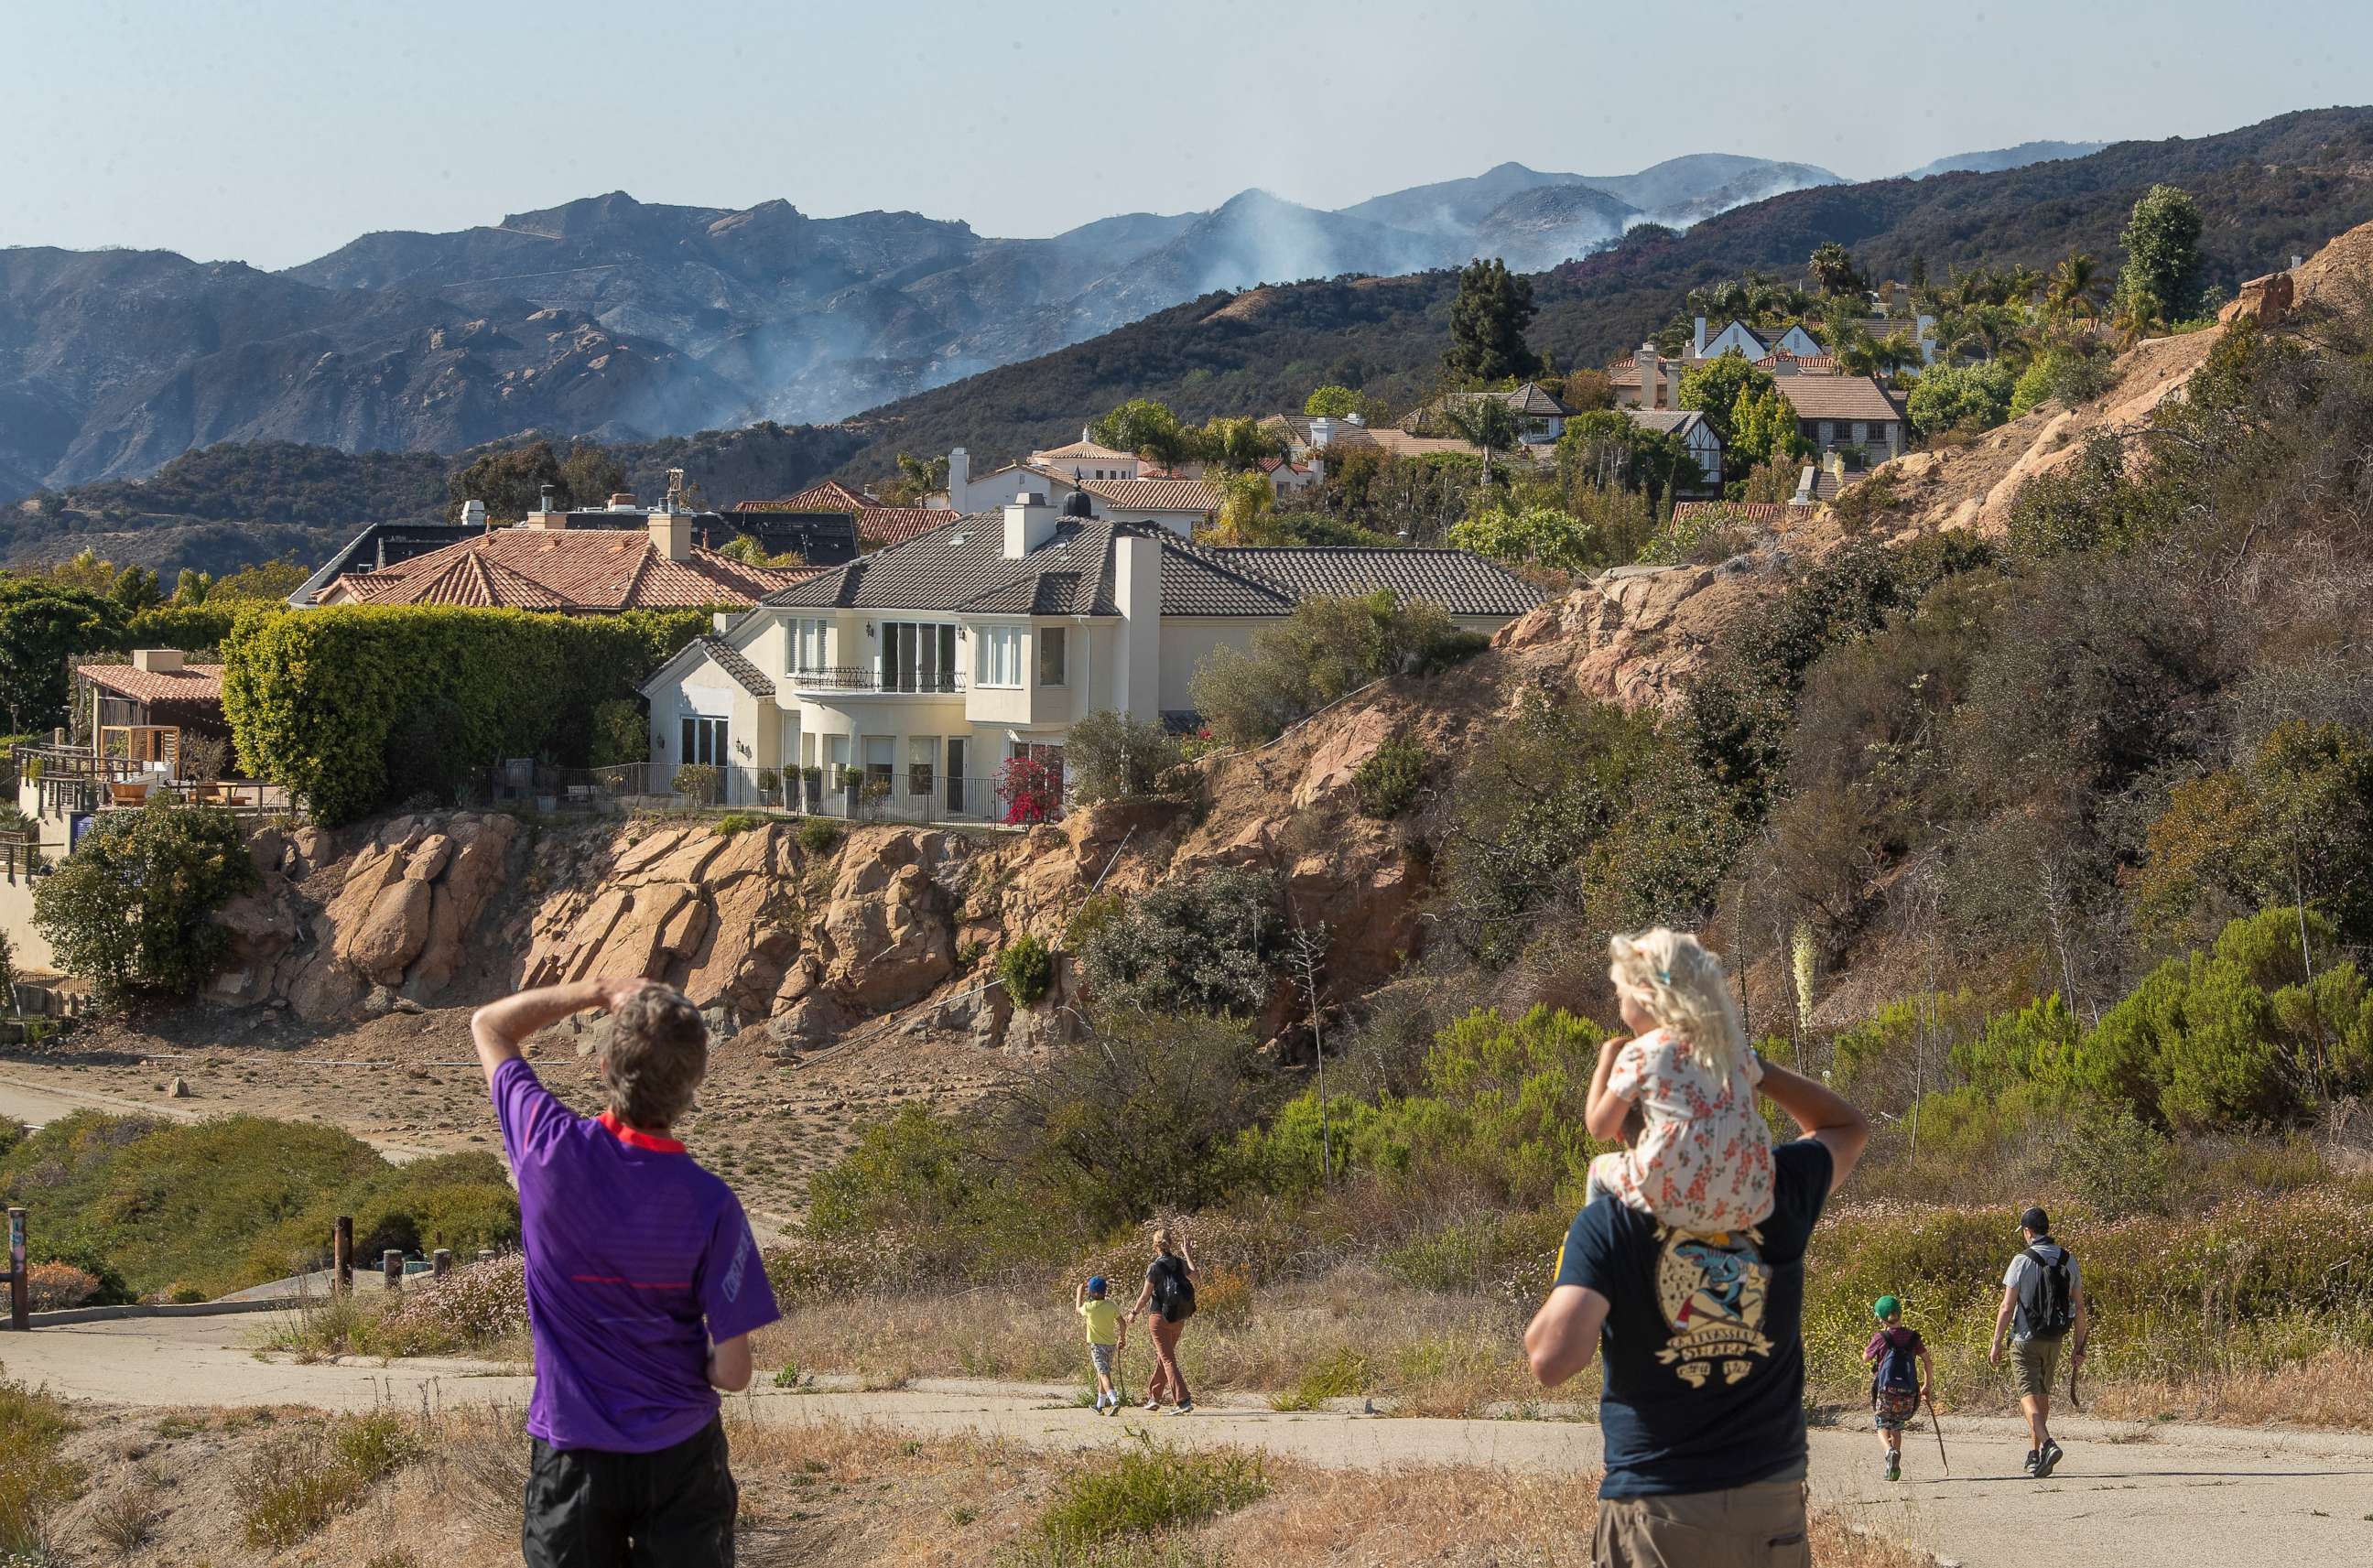 PHOTO: A brush fire burns near homes in the Highlands community of Pacific Palisades in California, as viewed from a fire road, May 17, 2021.